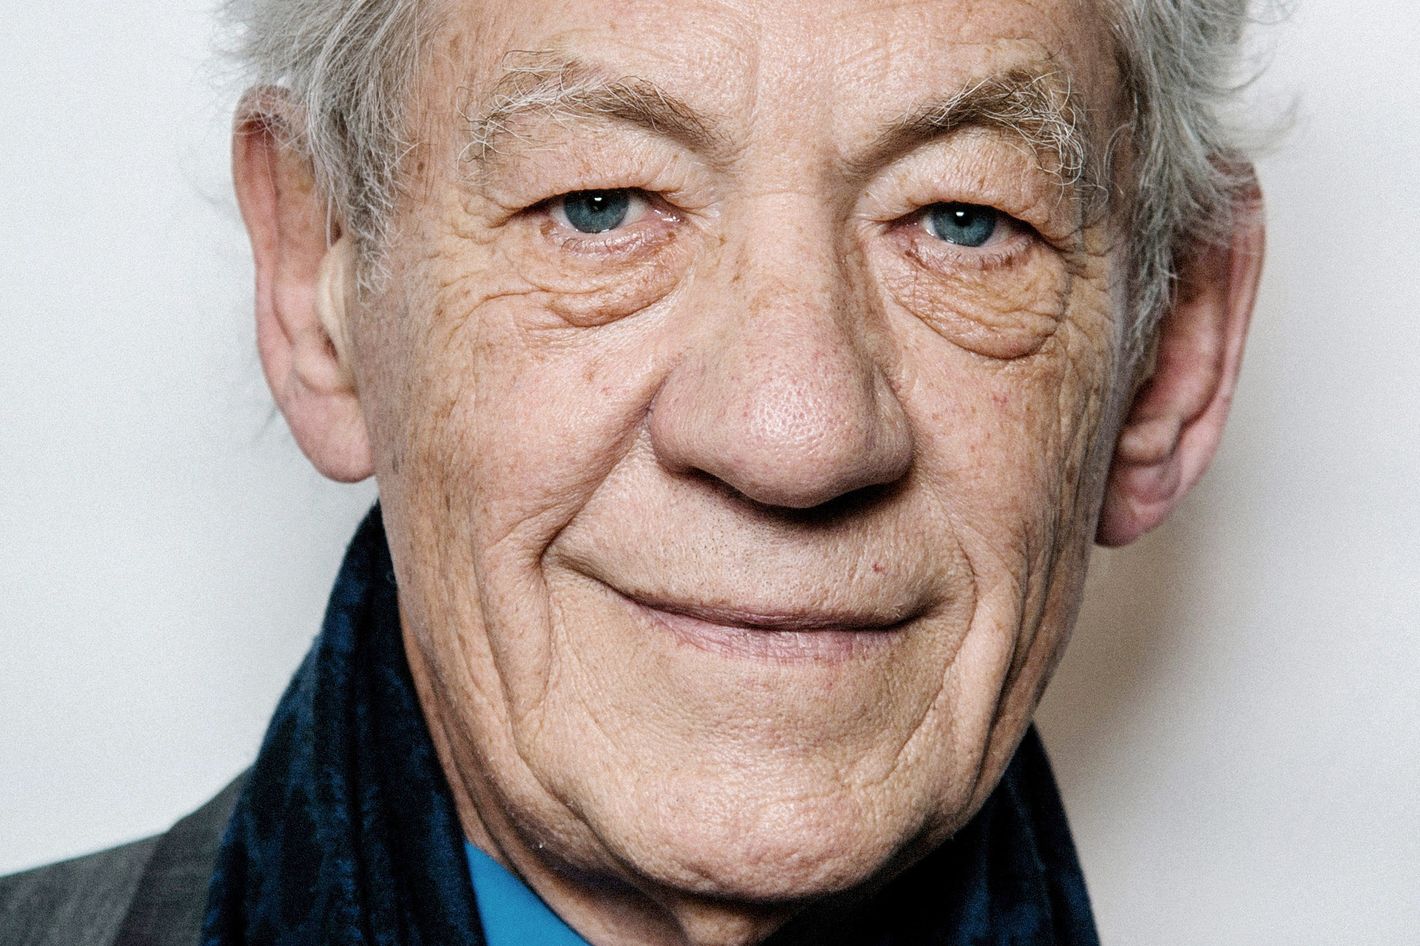 sir Ian Mckellen To Reveal How He Acts So Well In The New Documentary Mckellen Playing The Part